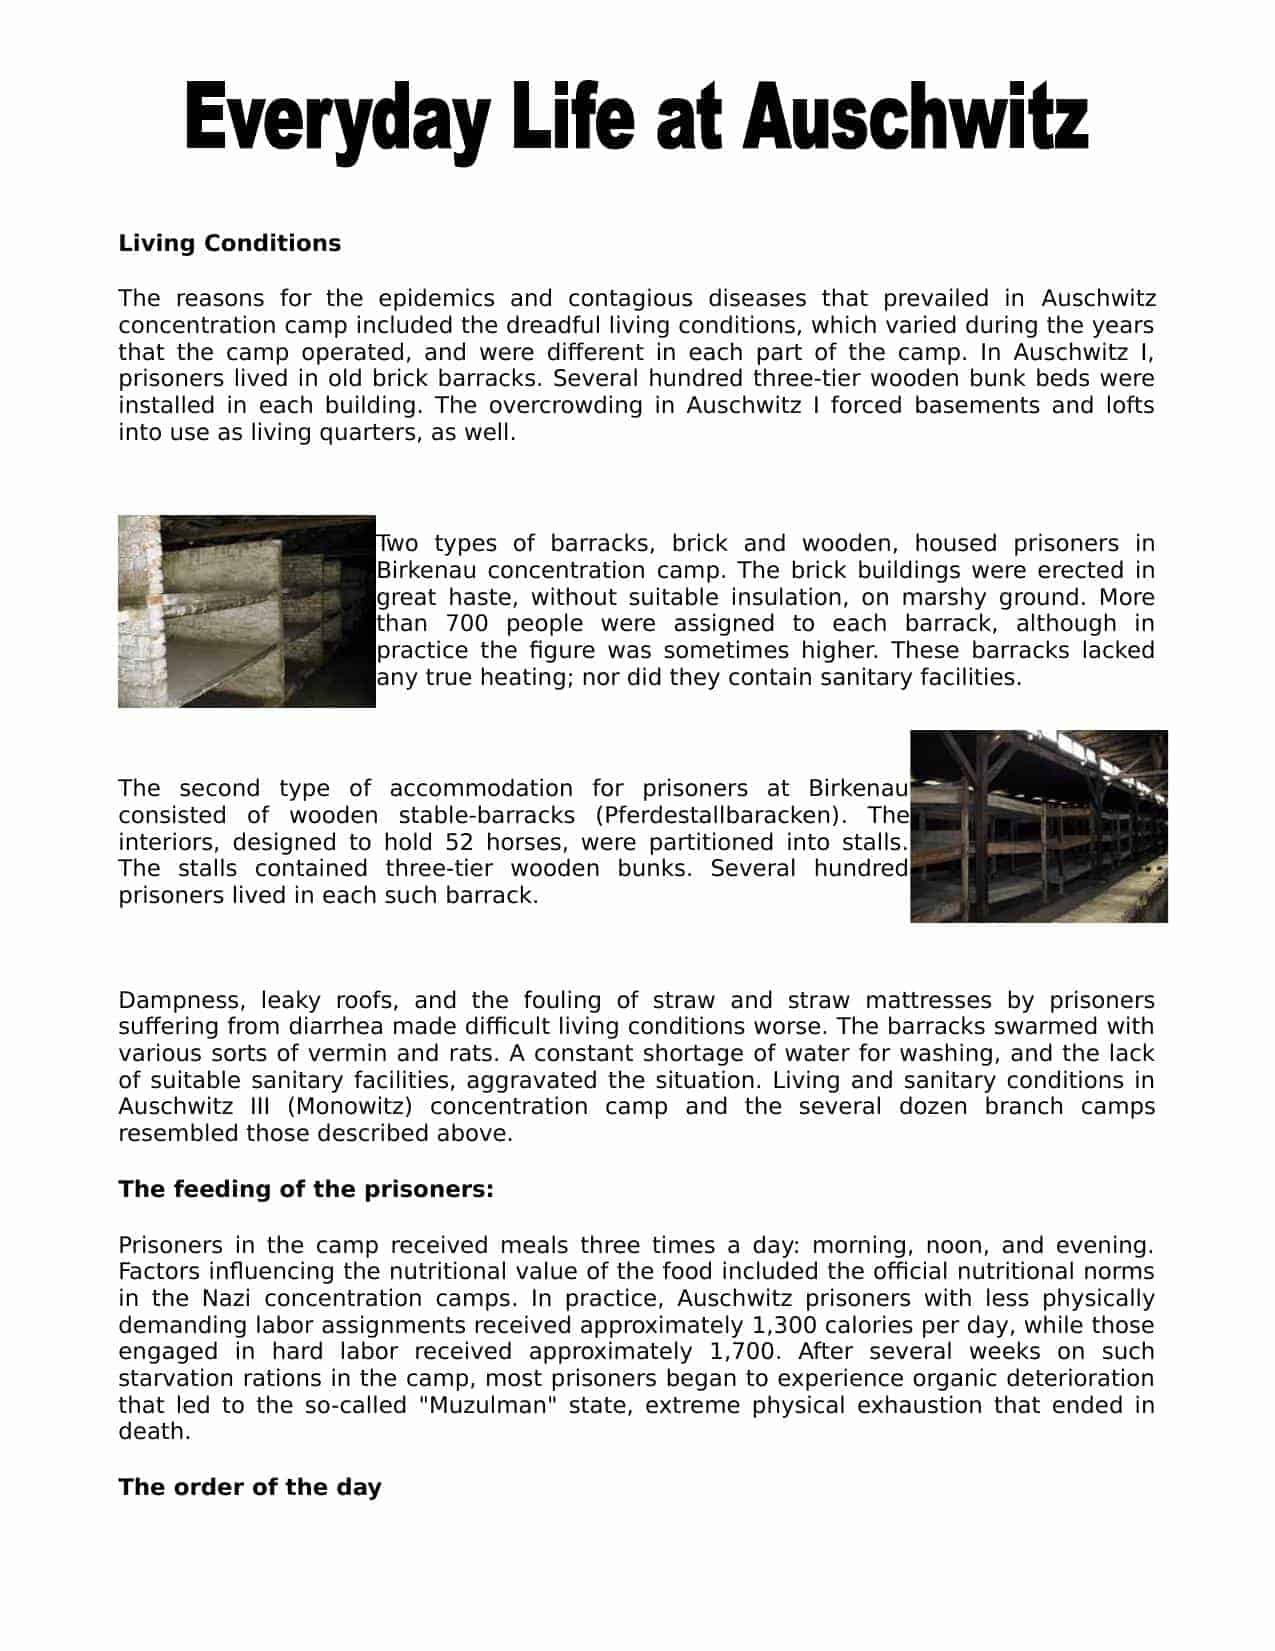 Living Conditions at Auschwitz Facts & Information | Worksheet Resource